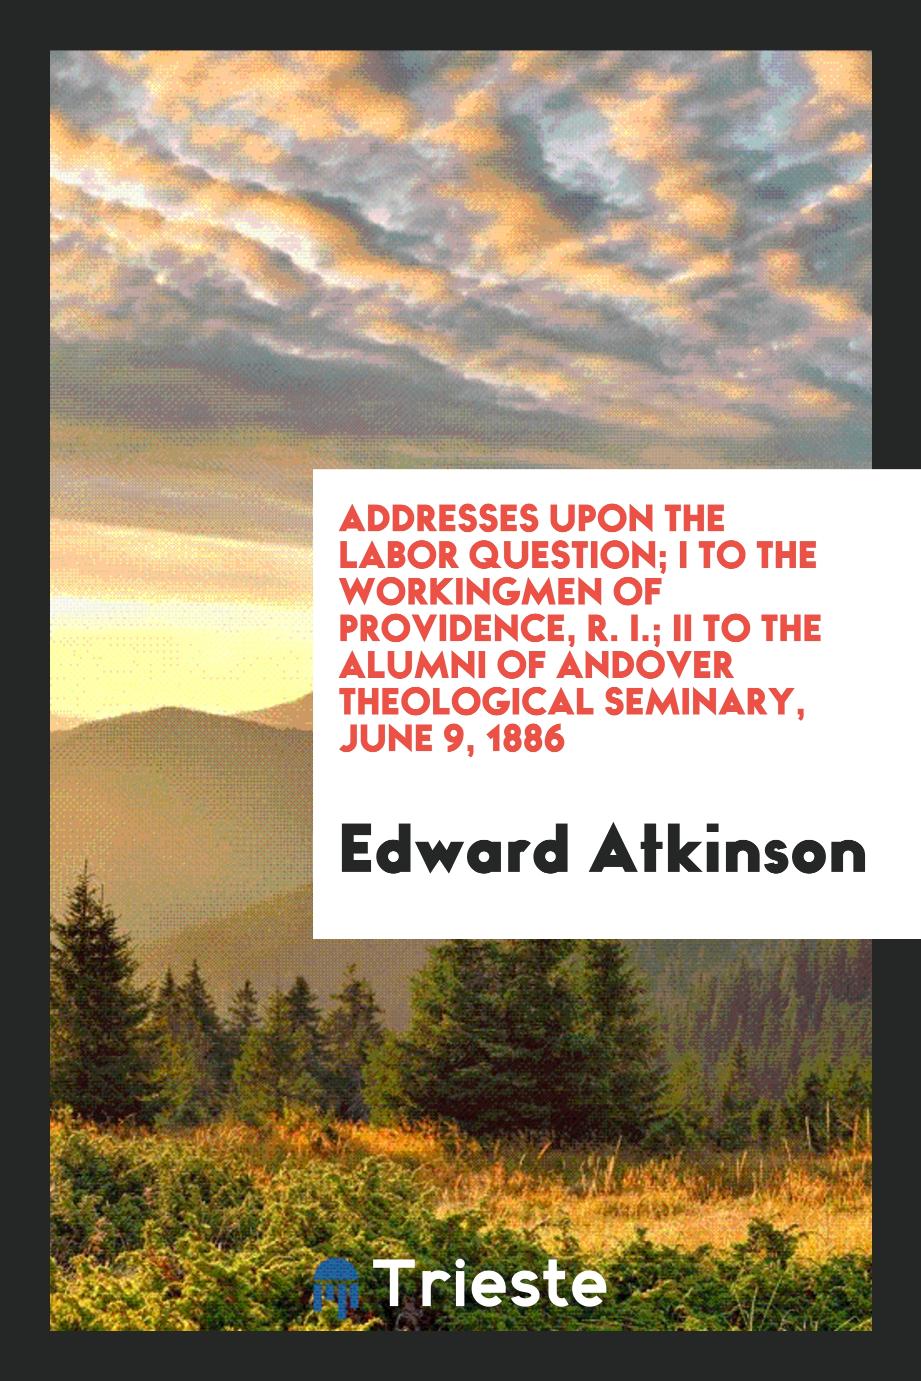 Addresses Upon the Labor Question; I To the workingmen of providence, R. I.; II To the alumni of andover theological seminary, June 9, 1886